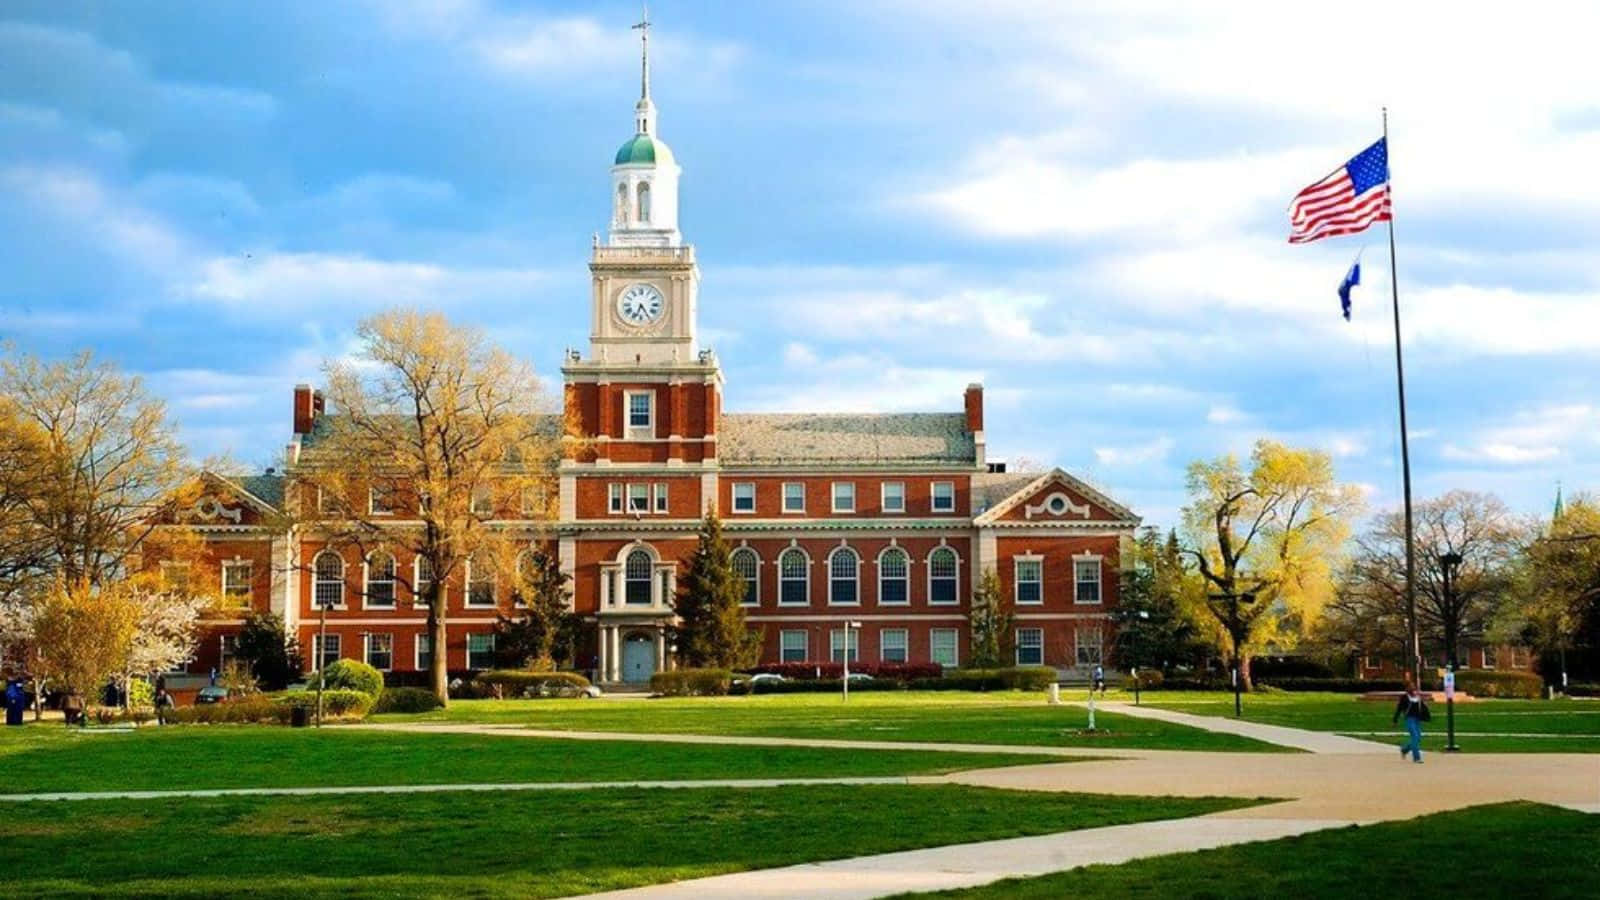 Classic College Buildingwith Clock Tower Wallpaper